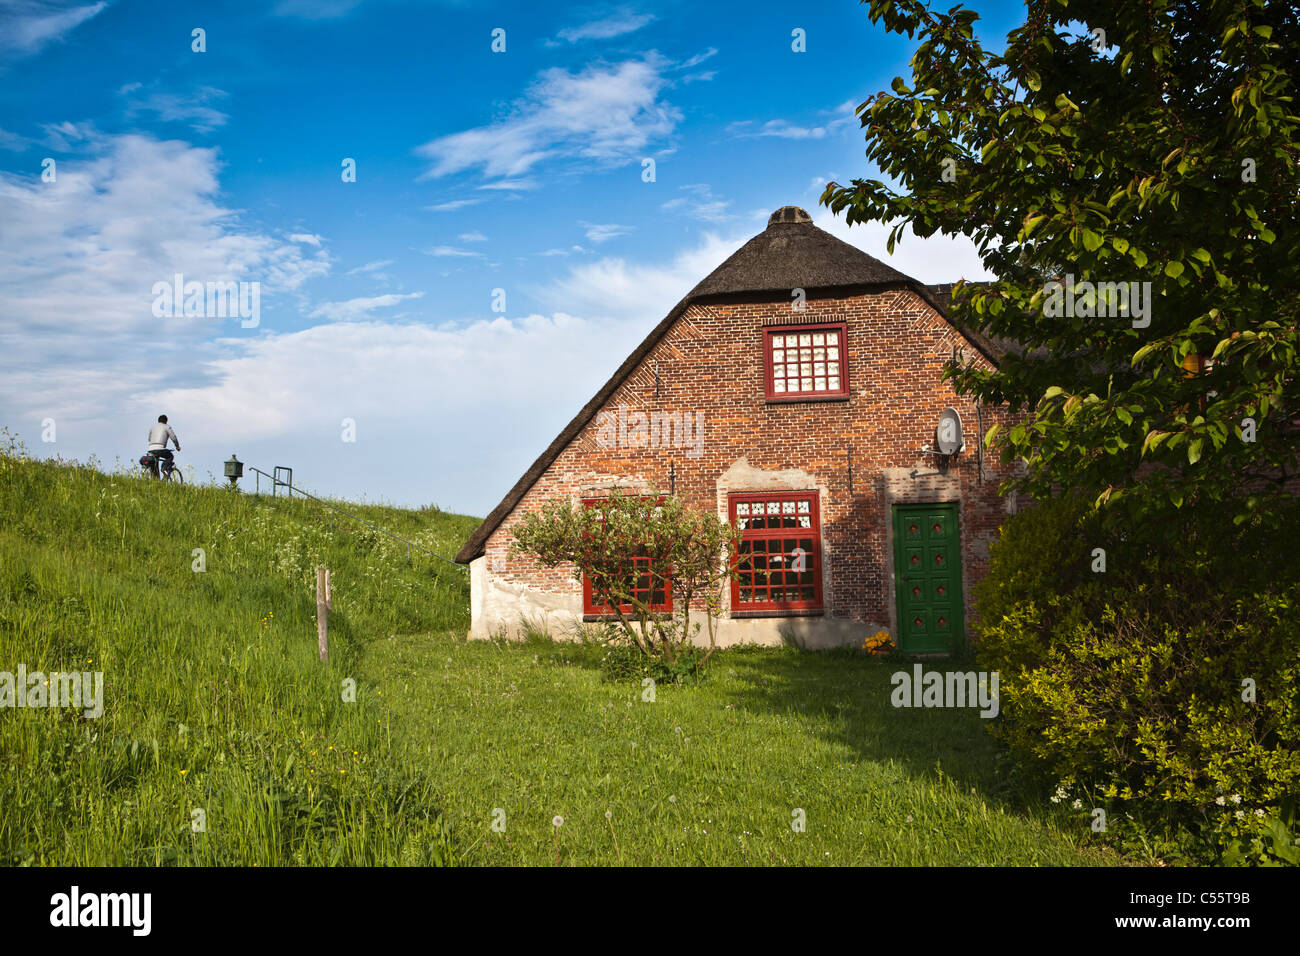 The Netherlands, Woudrichem, house near dike for protection against floods of Maas river. Stock Photo